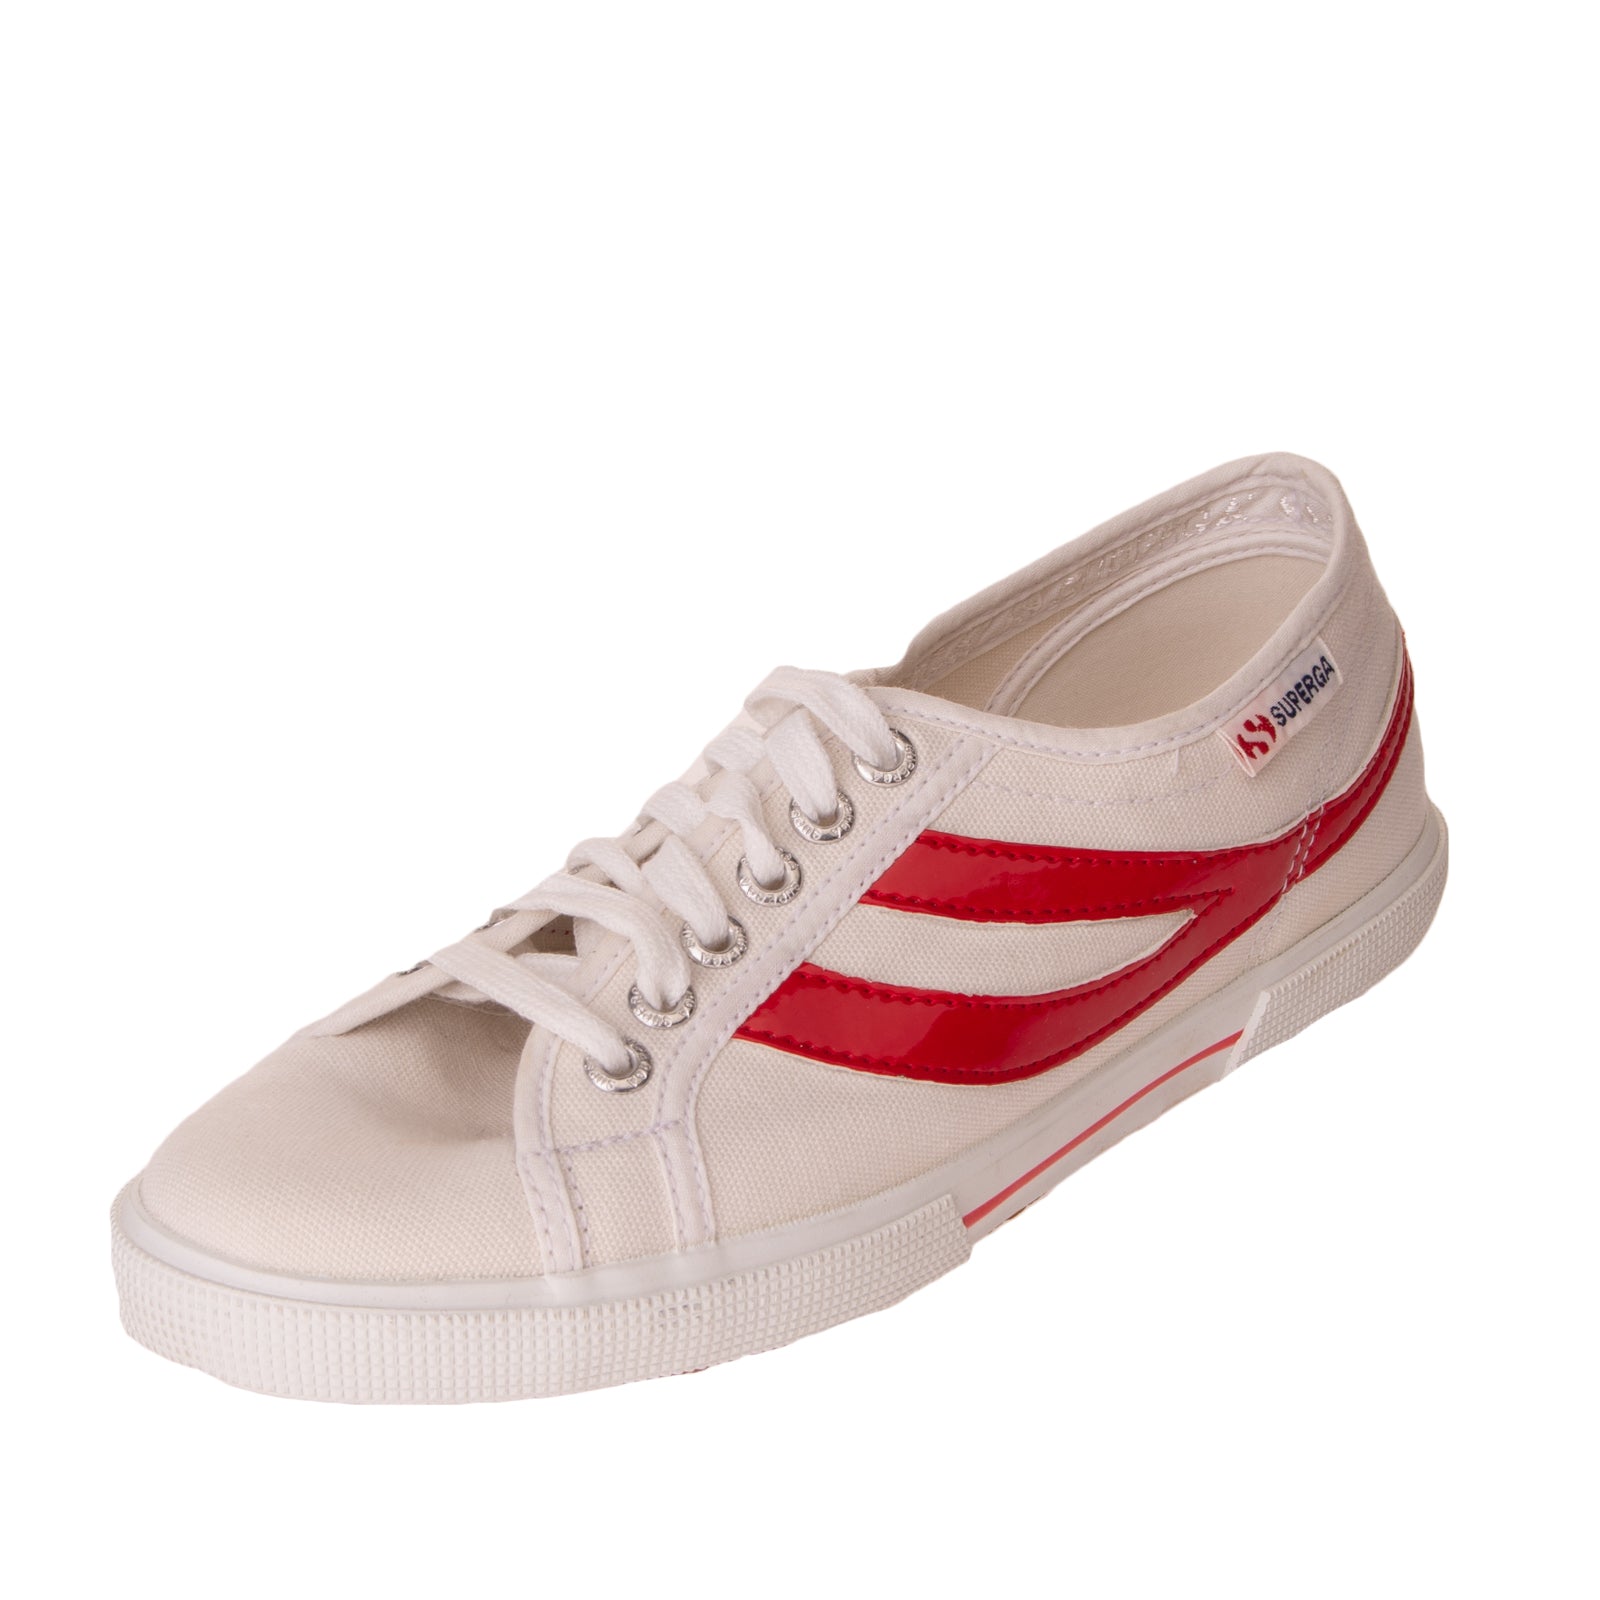 SUPERGA Canvas Sneakers Size 36 UK 3.5 US 6 Two Tone Varnished Effect Trim gallery main photo